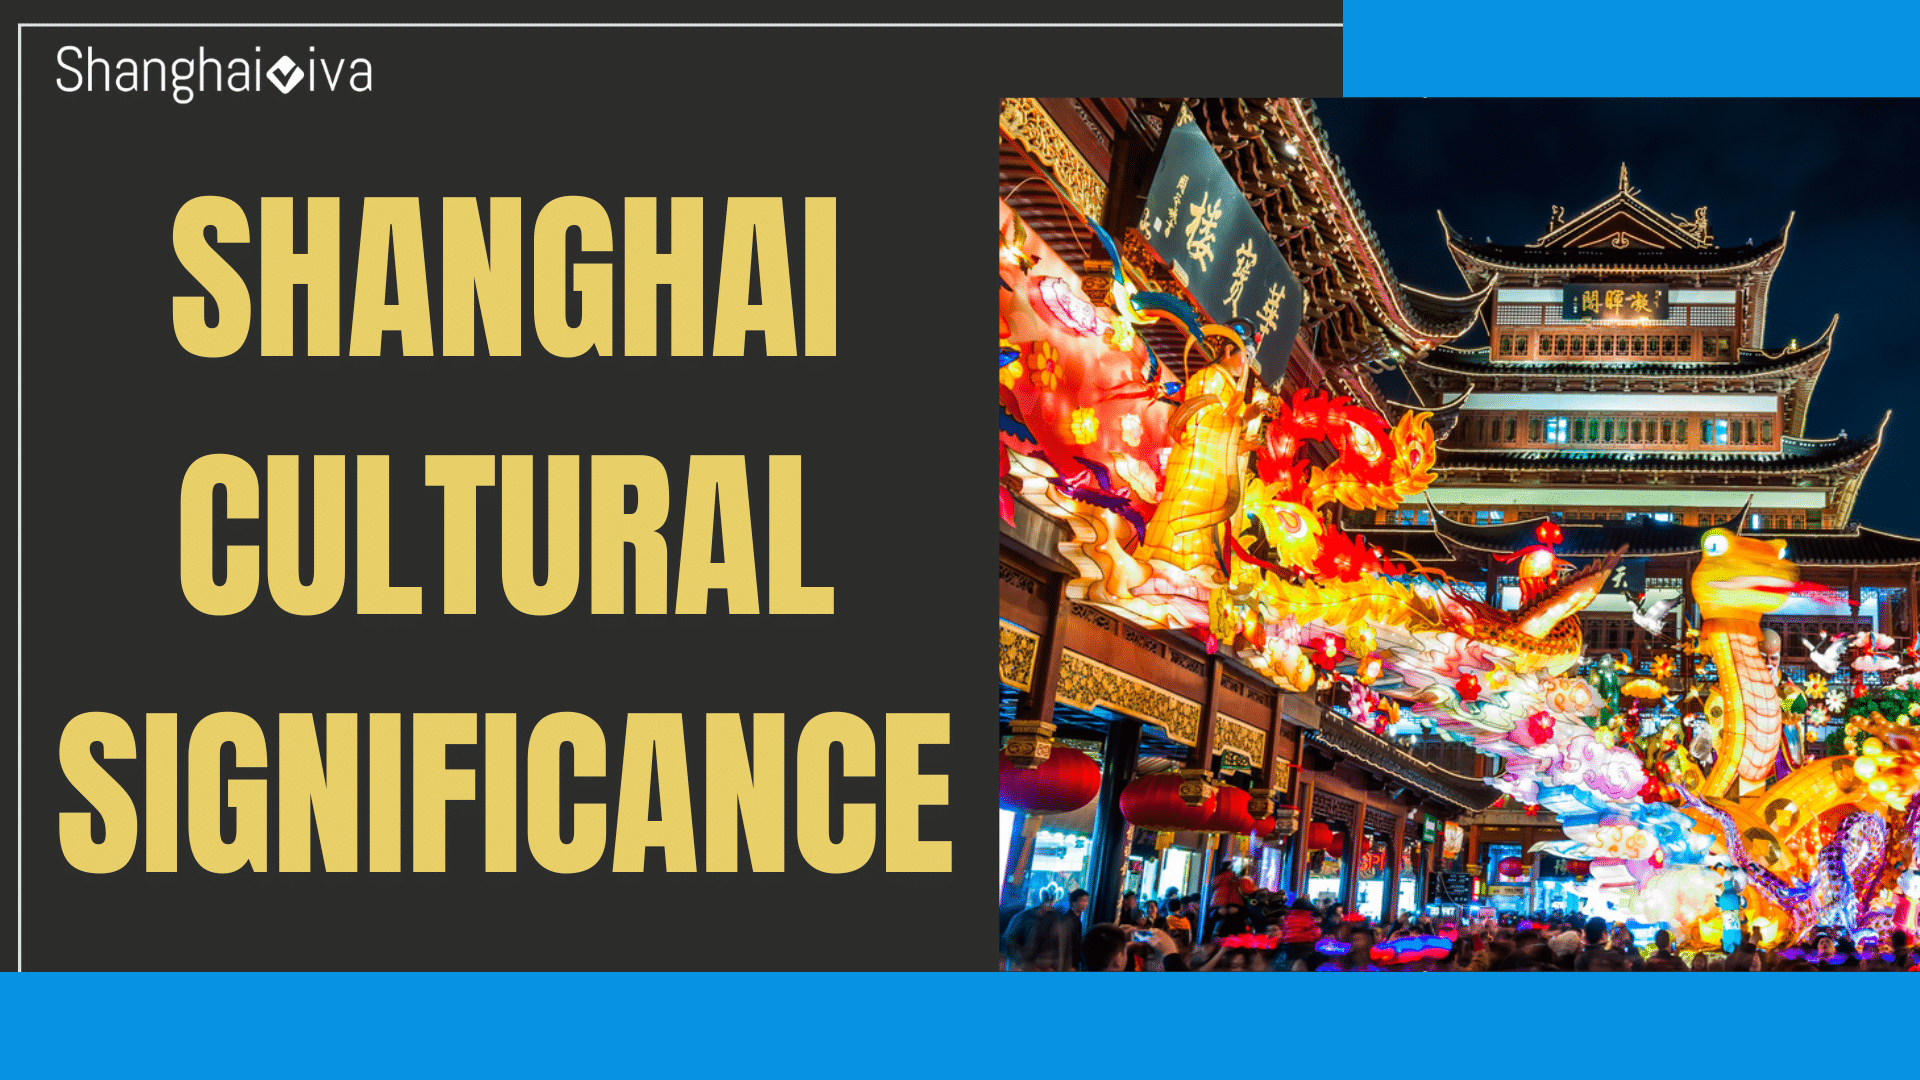 Unveiling the Shanghai Cultural Significance